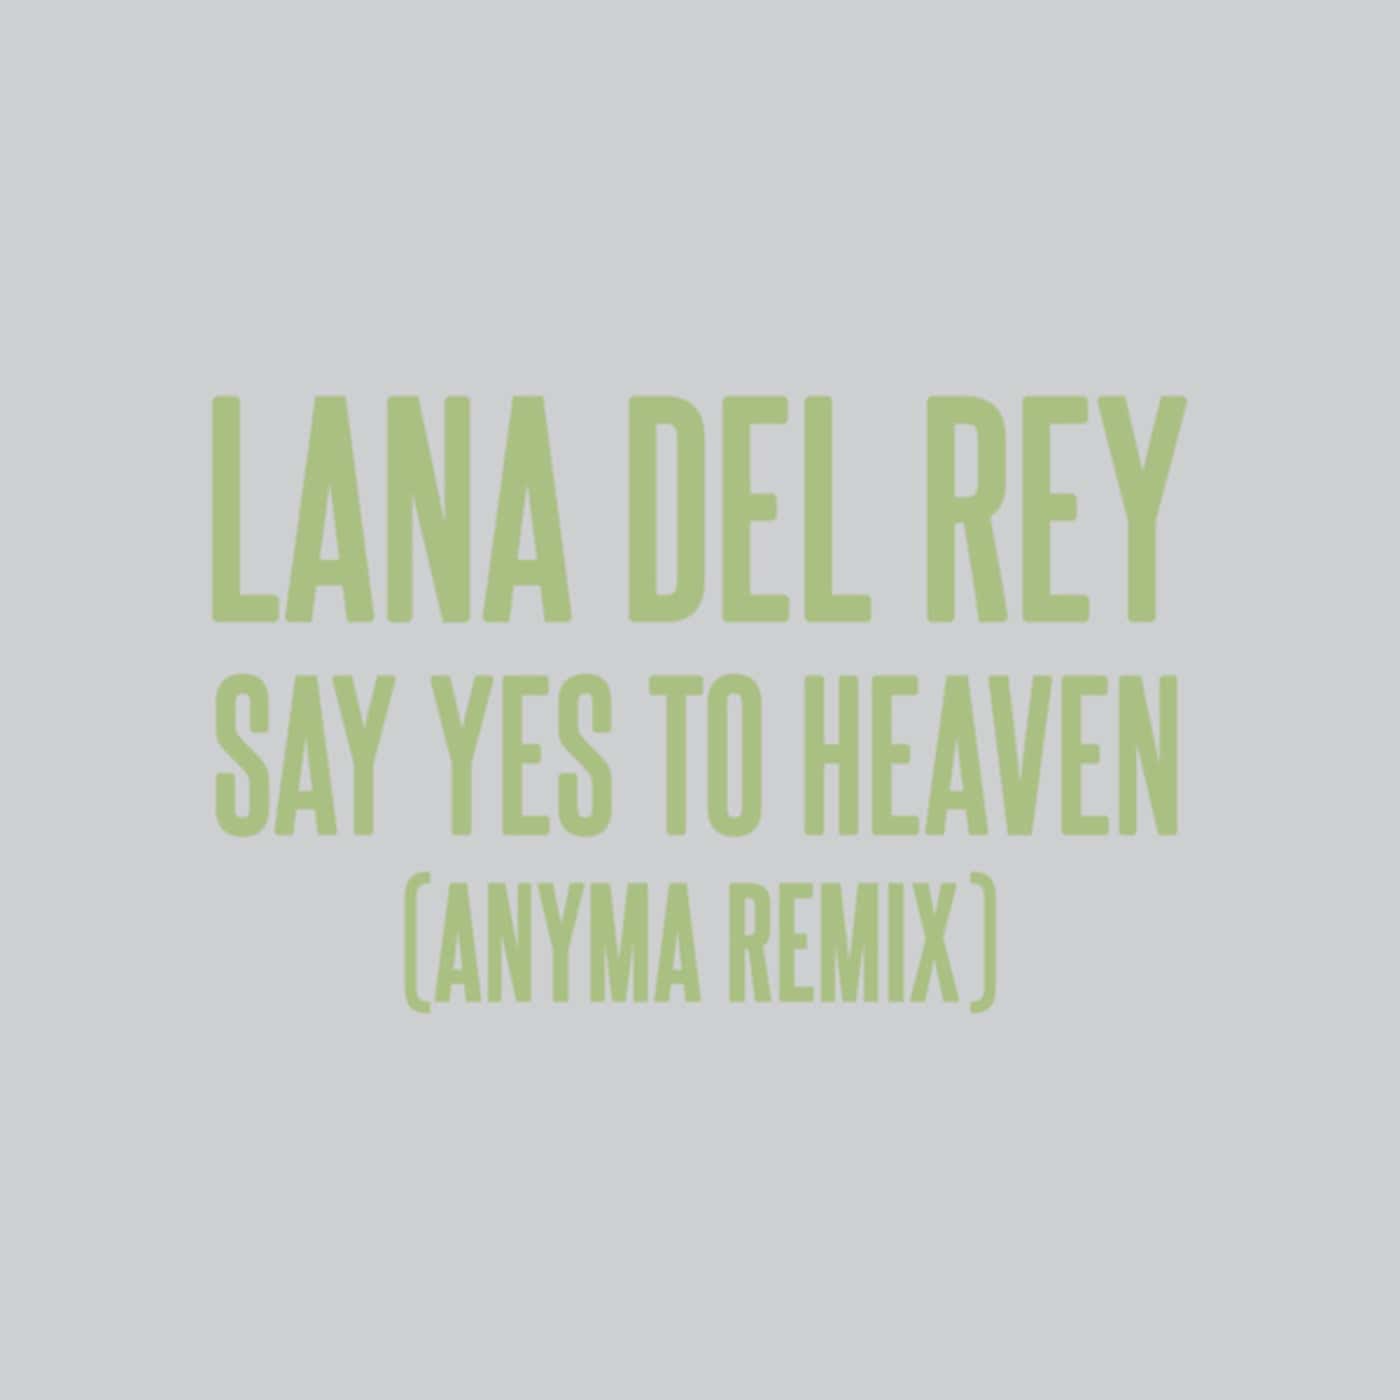 image cover: Lana Del Rey, Anyma (ofc) - Say Yes To Heaven (Anyma Remix) / Dance